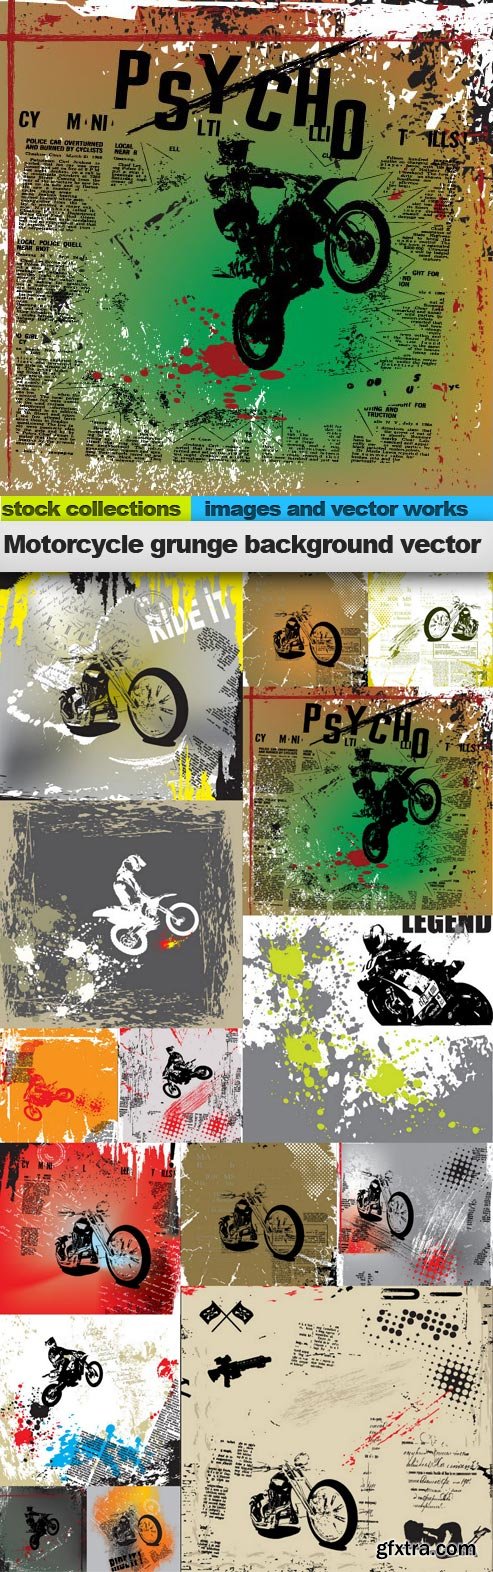 Motorcycle grunge background vector, 15 x EPS